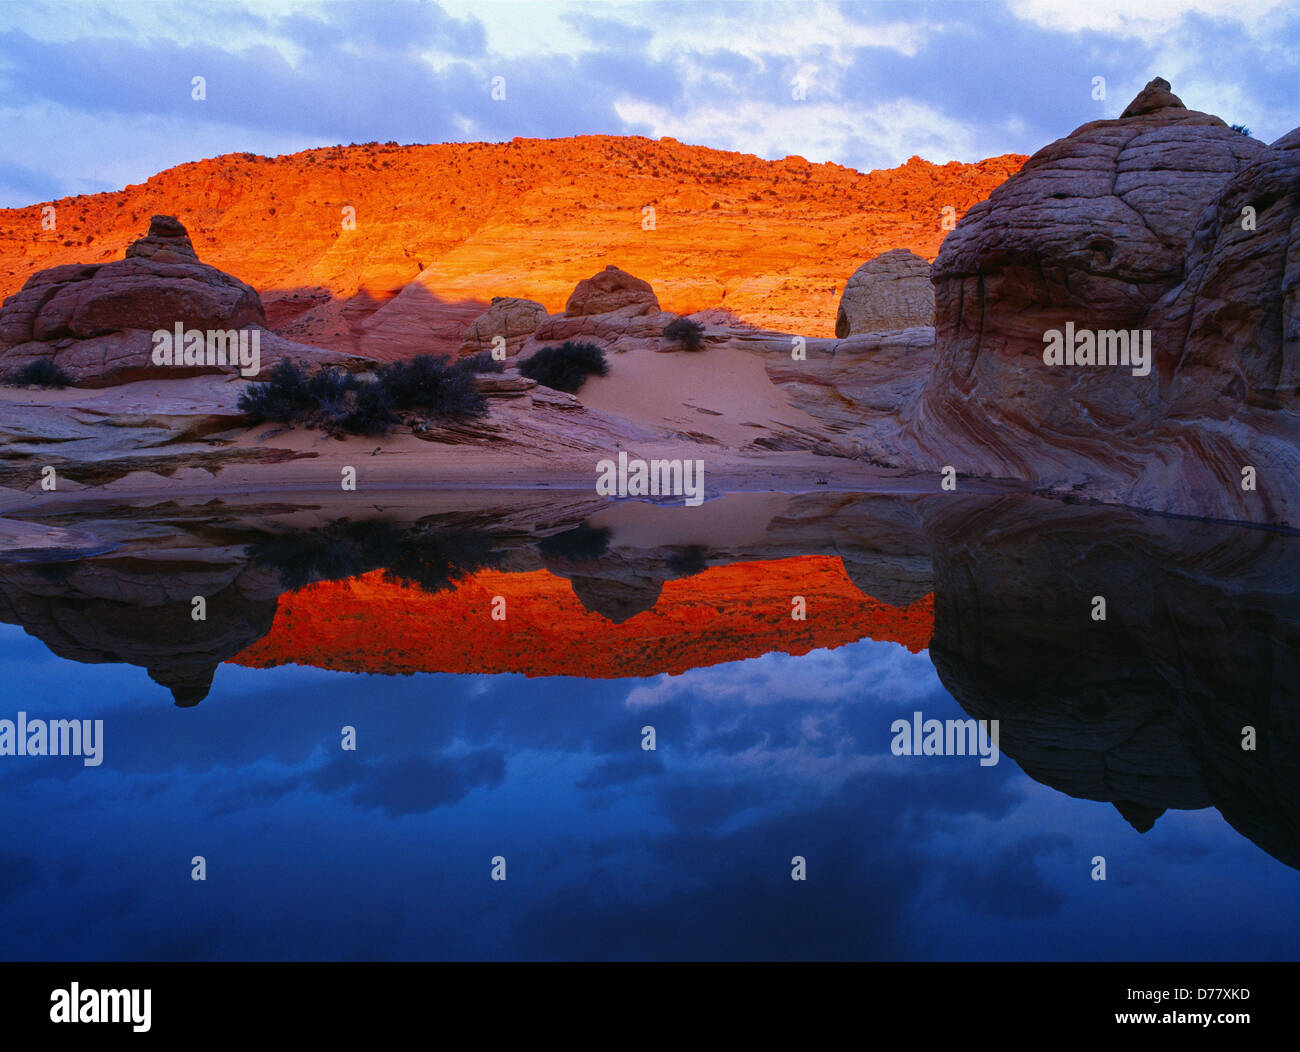 Early morning reflection in slickrock pool Paria Canyon Vermilion Cliffs Wilderness Area Vermilion Cliffs National Monument Stock Photo